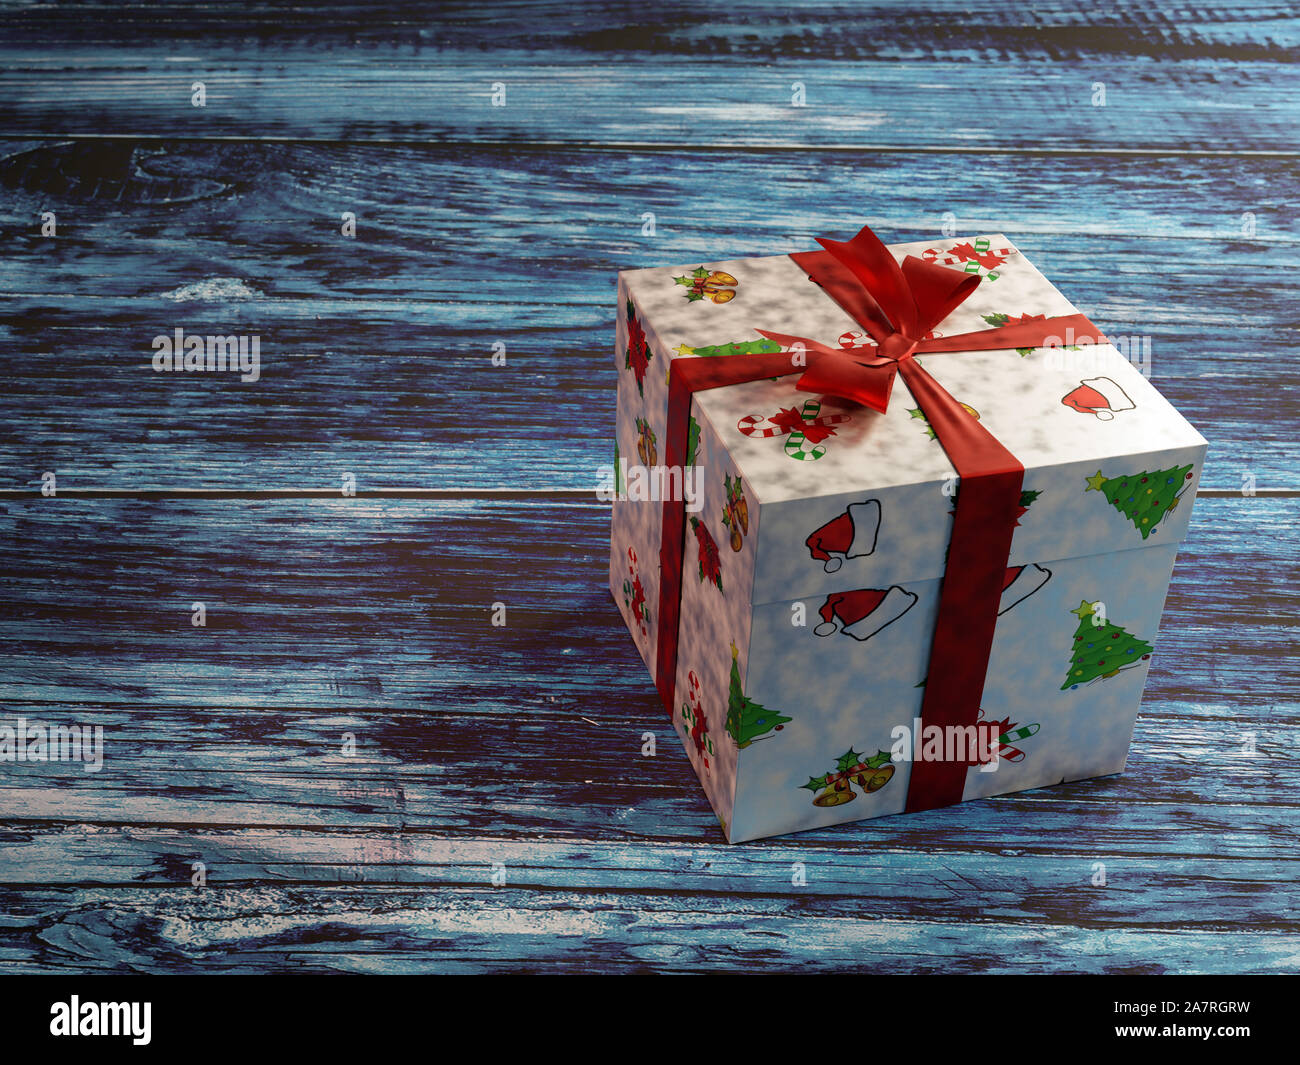 Christmas present box with red ribbon on rustic bluish wooden plank surface Stock Photo